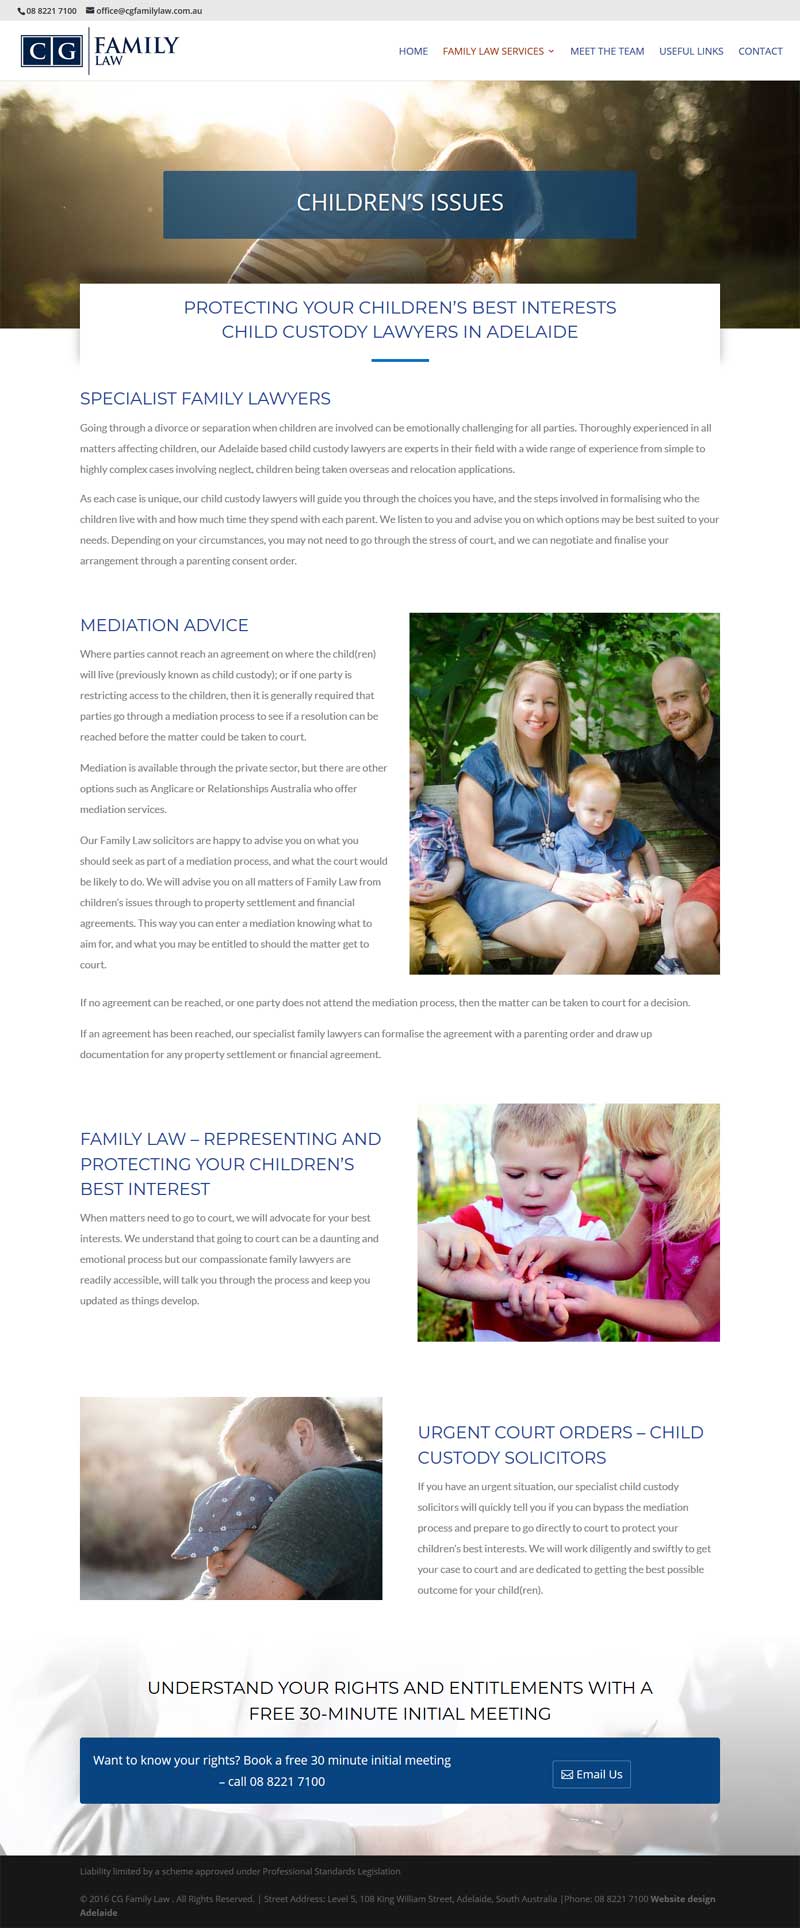 website design for cgfamily law adelaide